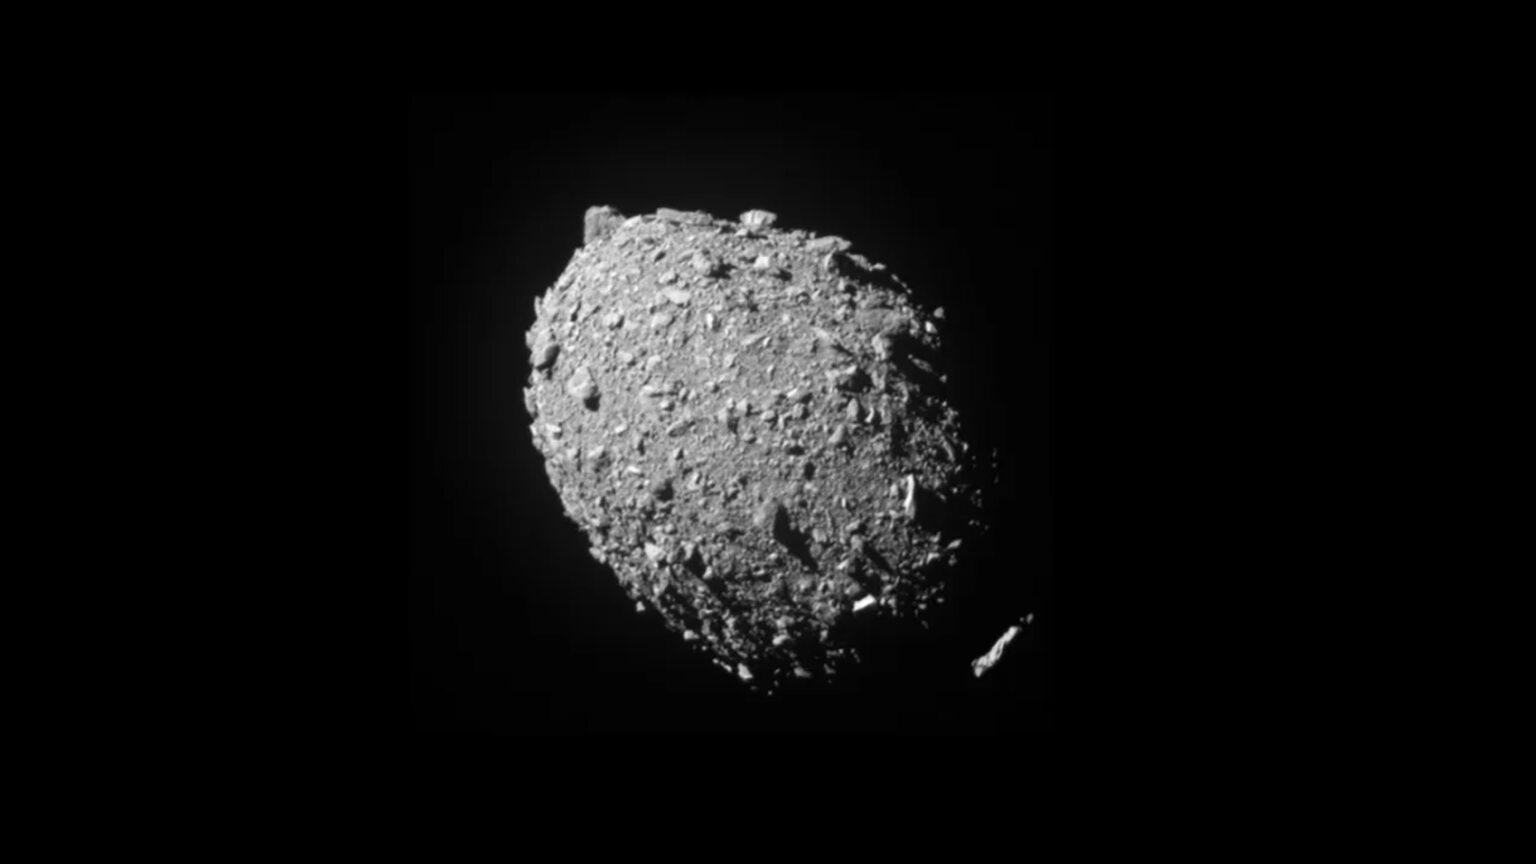 NASA's DART mission captured the asteroid Dimorphos just before it was hit by the spacecraft on September 26, 2022. The observations of the asteroid before and after the impact suggest that it is a loosely packed "rubble pile" object.